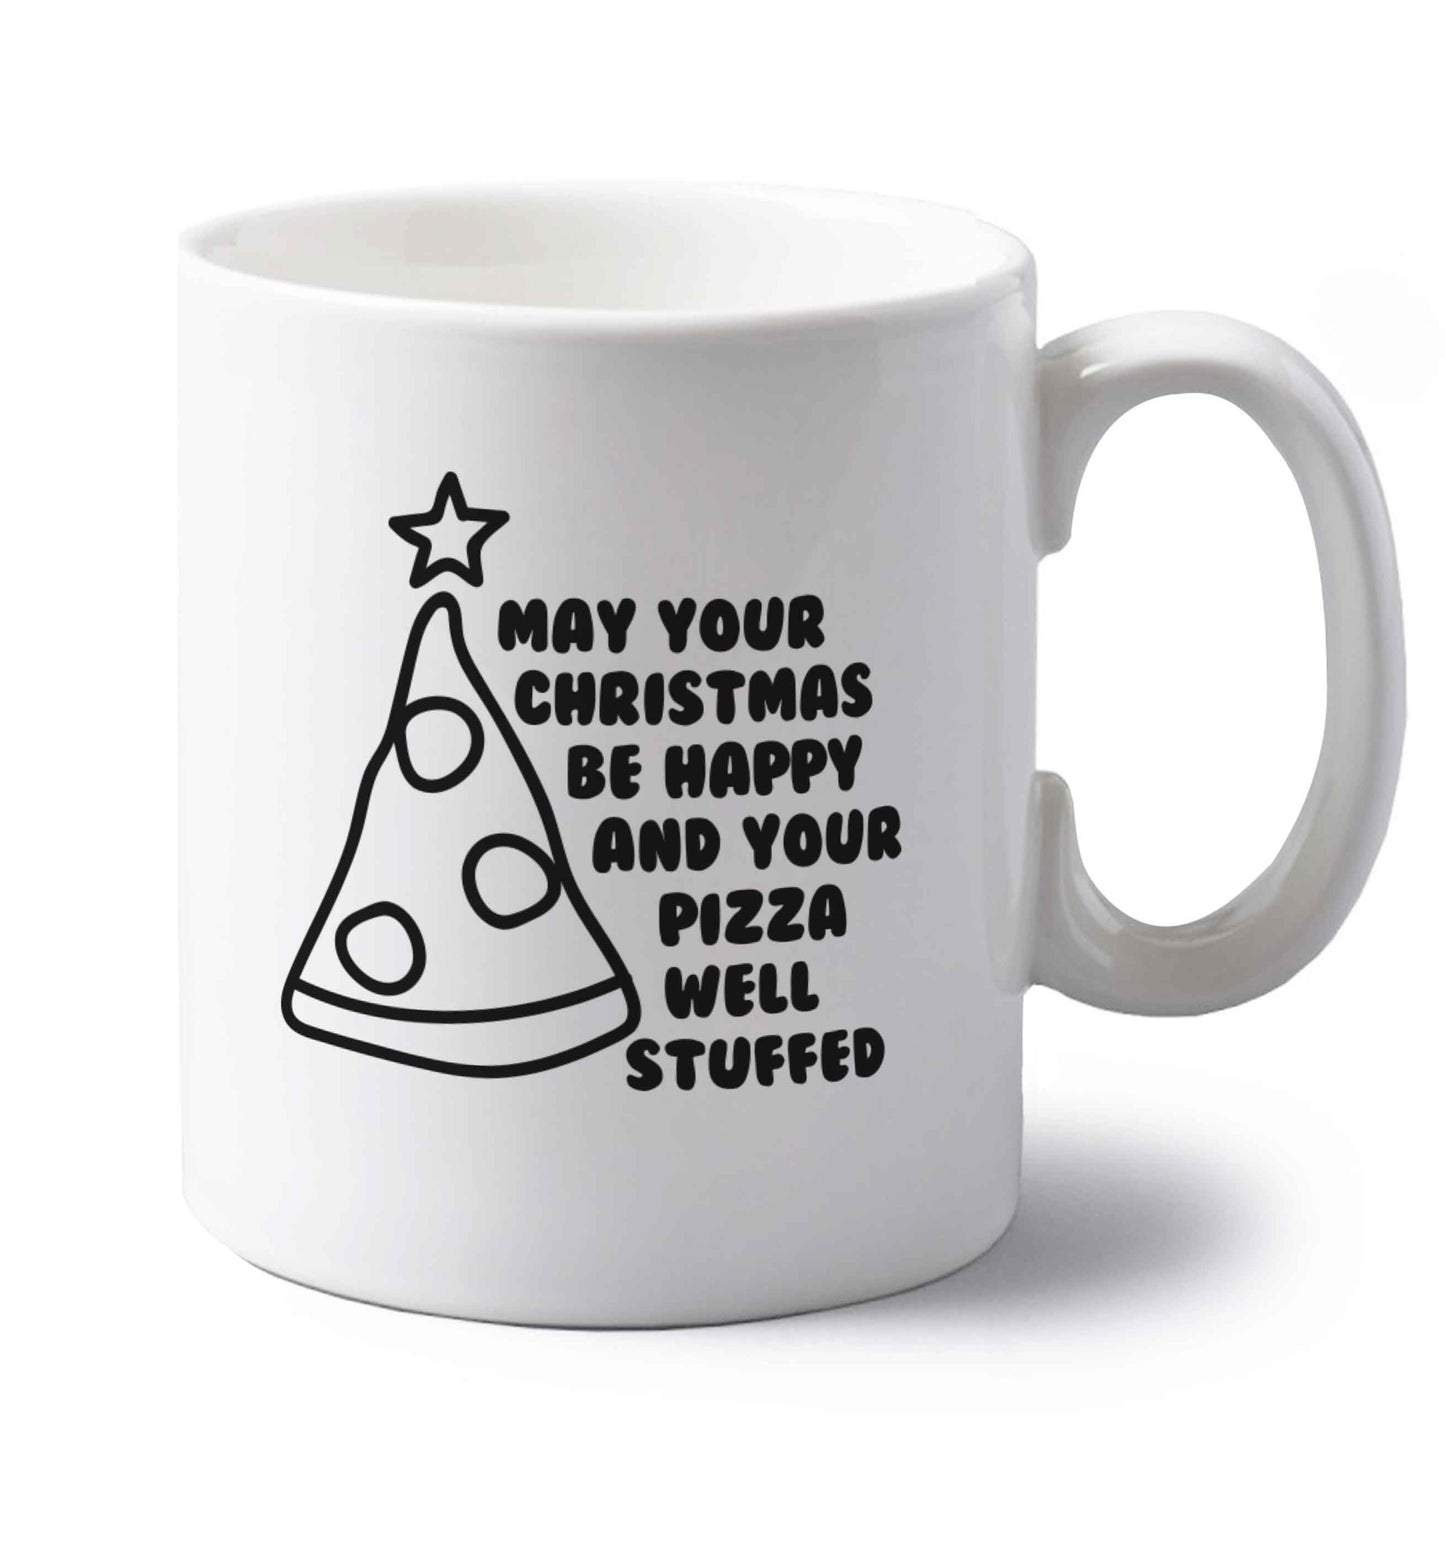 May your Christmas be happy and your pizza well stuffed left handed white ceramic mug 